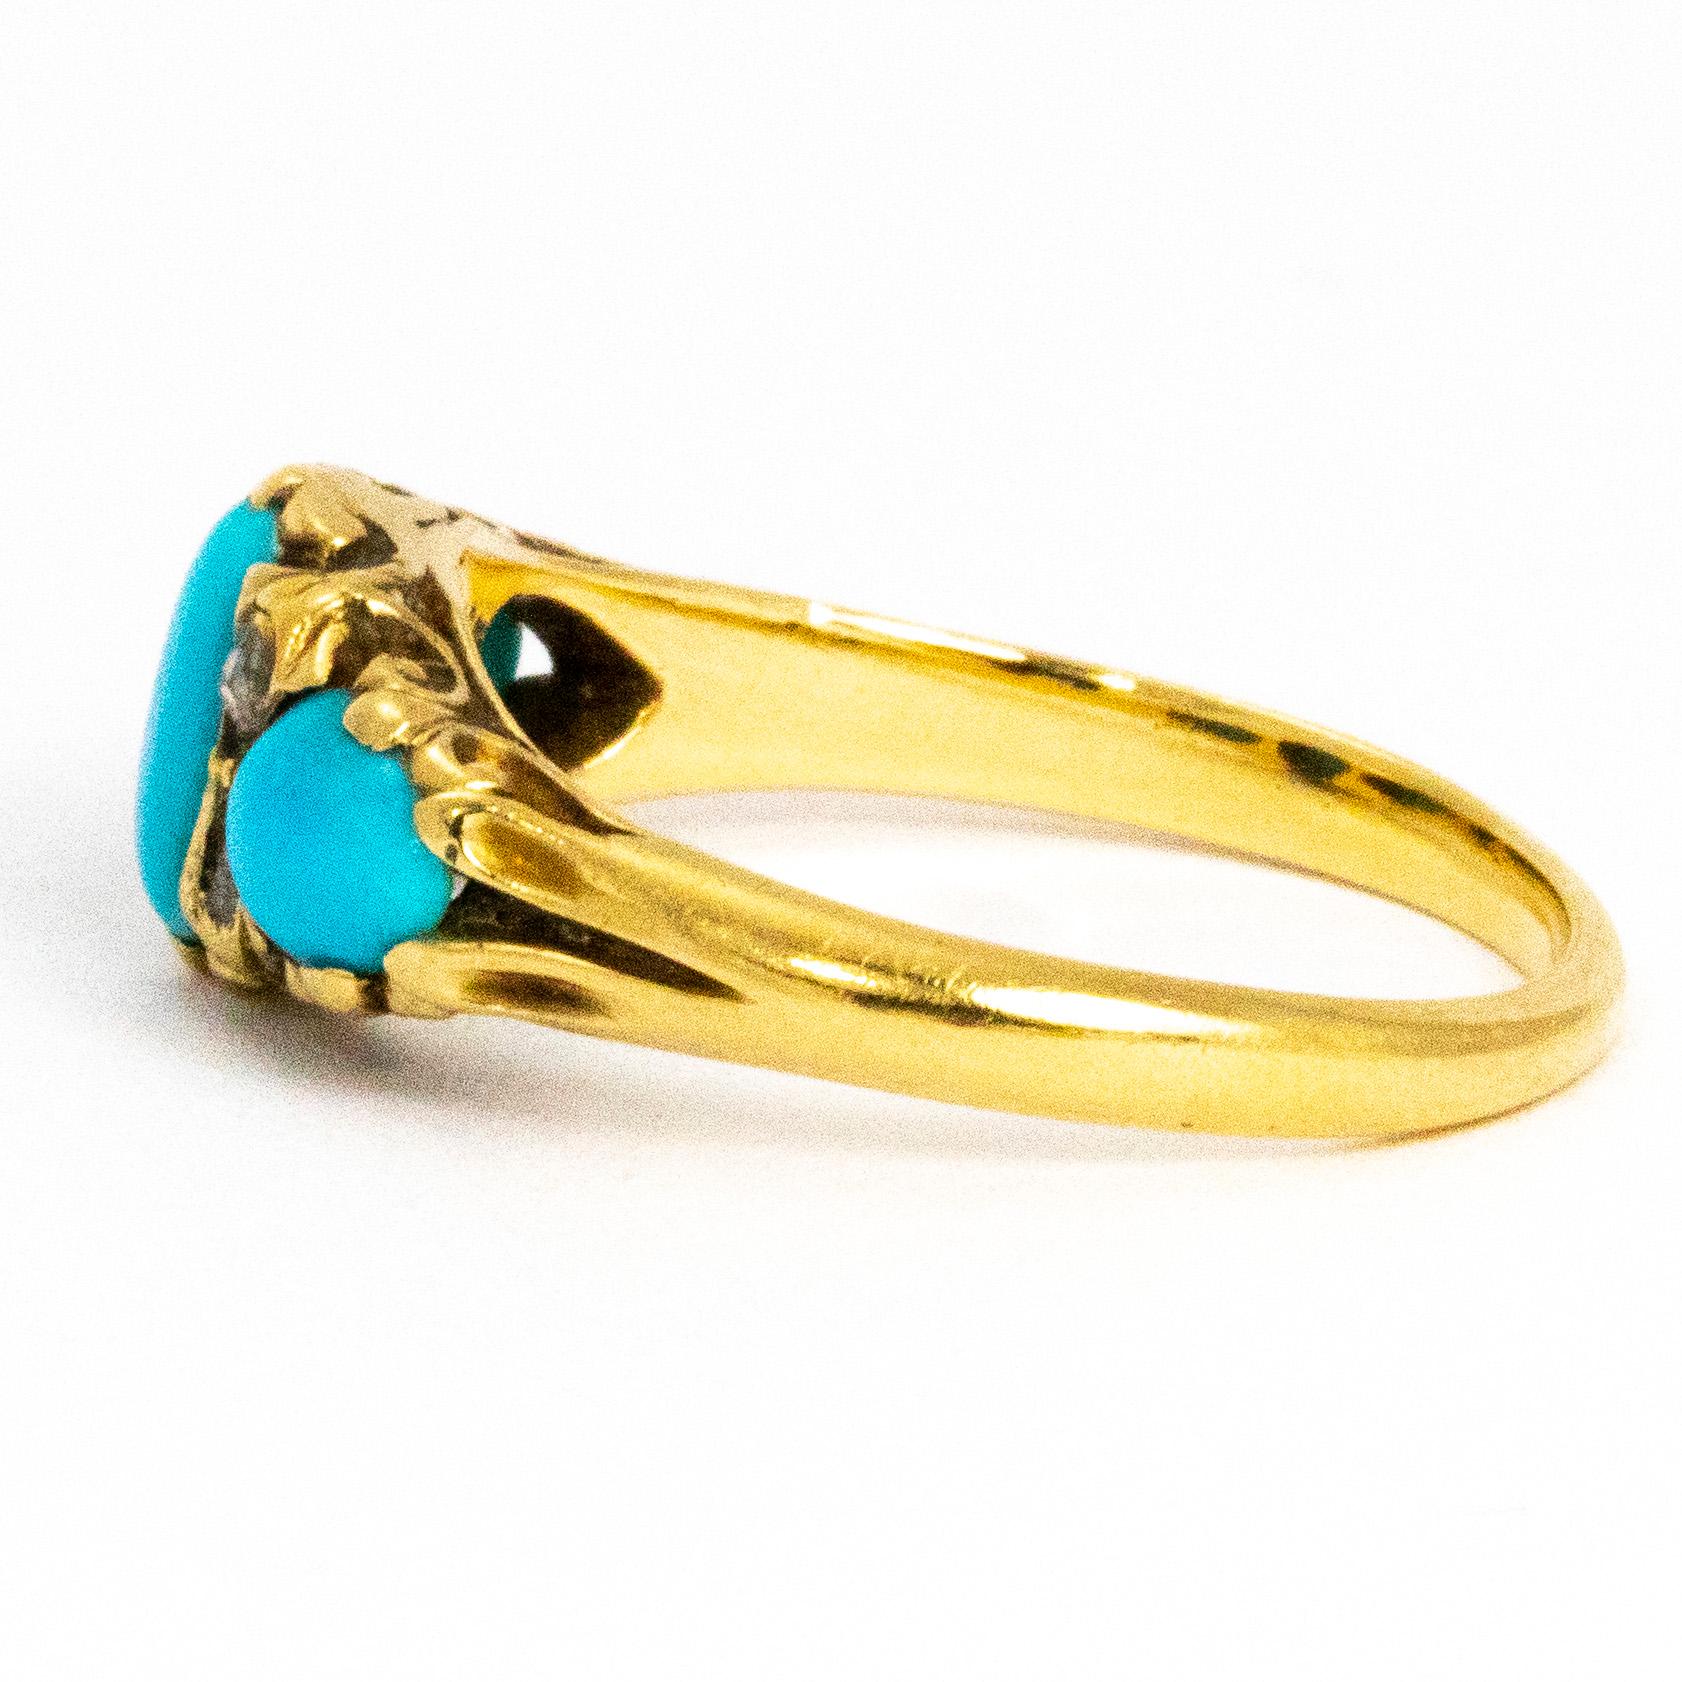 The pop of these bright turquoise stones next to the 18 carat gold is beautiful. The rose cut diamonds that sit in pairs between them add just the right amount of sparkle. The ring is modelled in 18ct gold. The centre stone measures 6.8mm x 4mm.